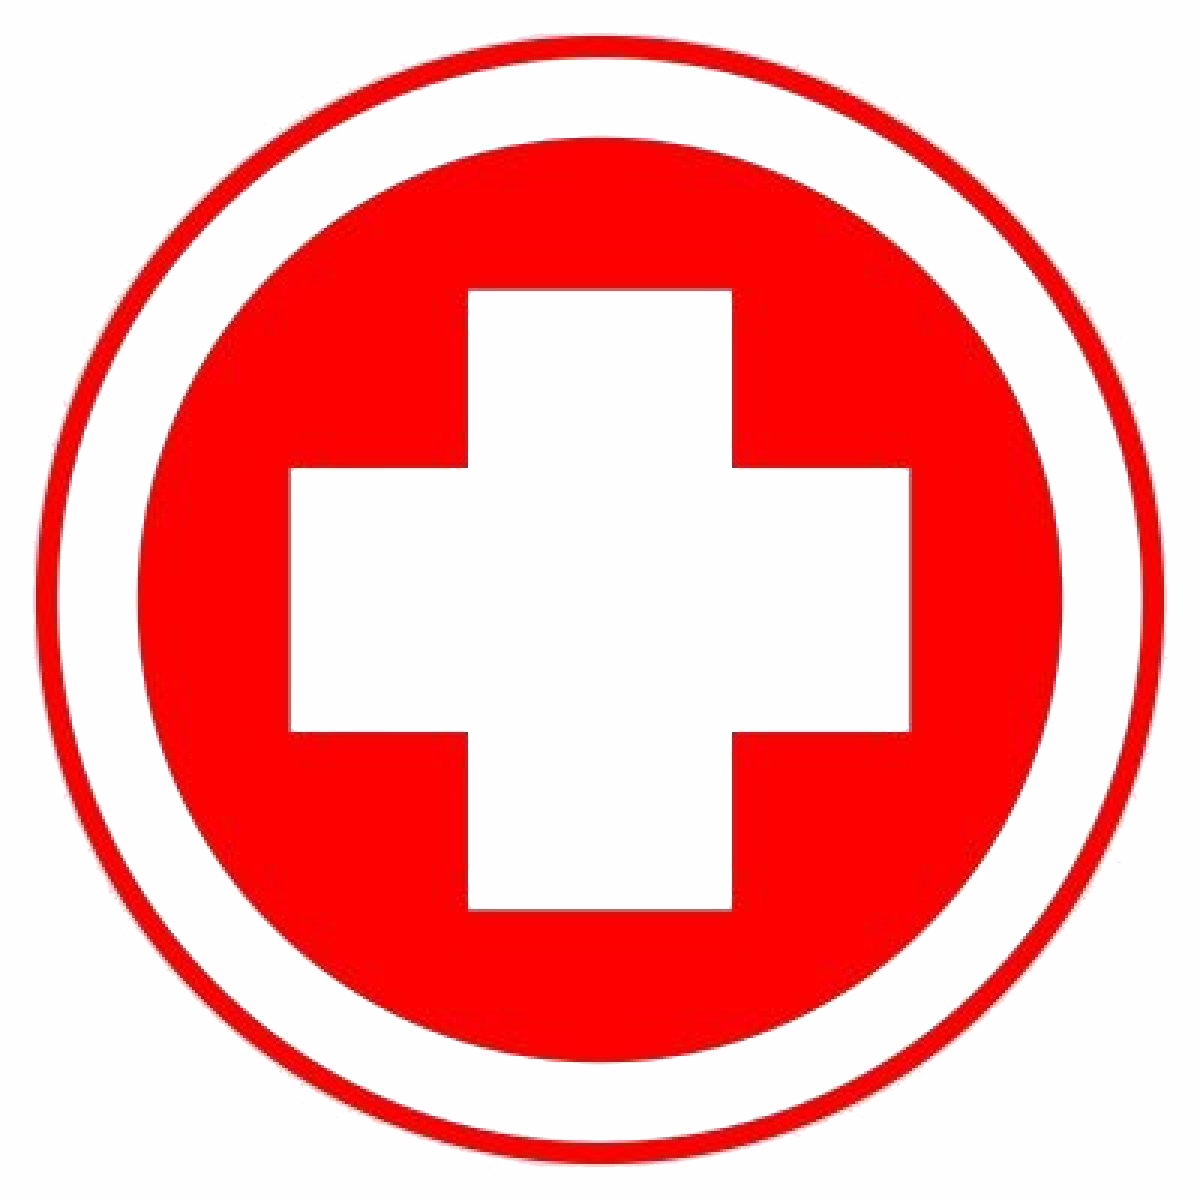 Red Medical Cross Symbol Clipart - Free Clip Art Images